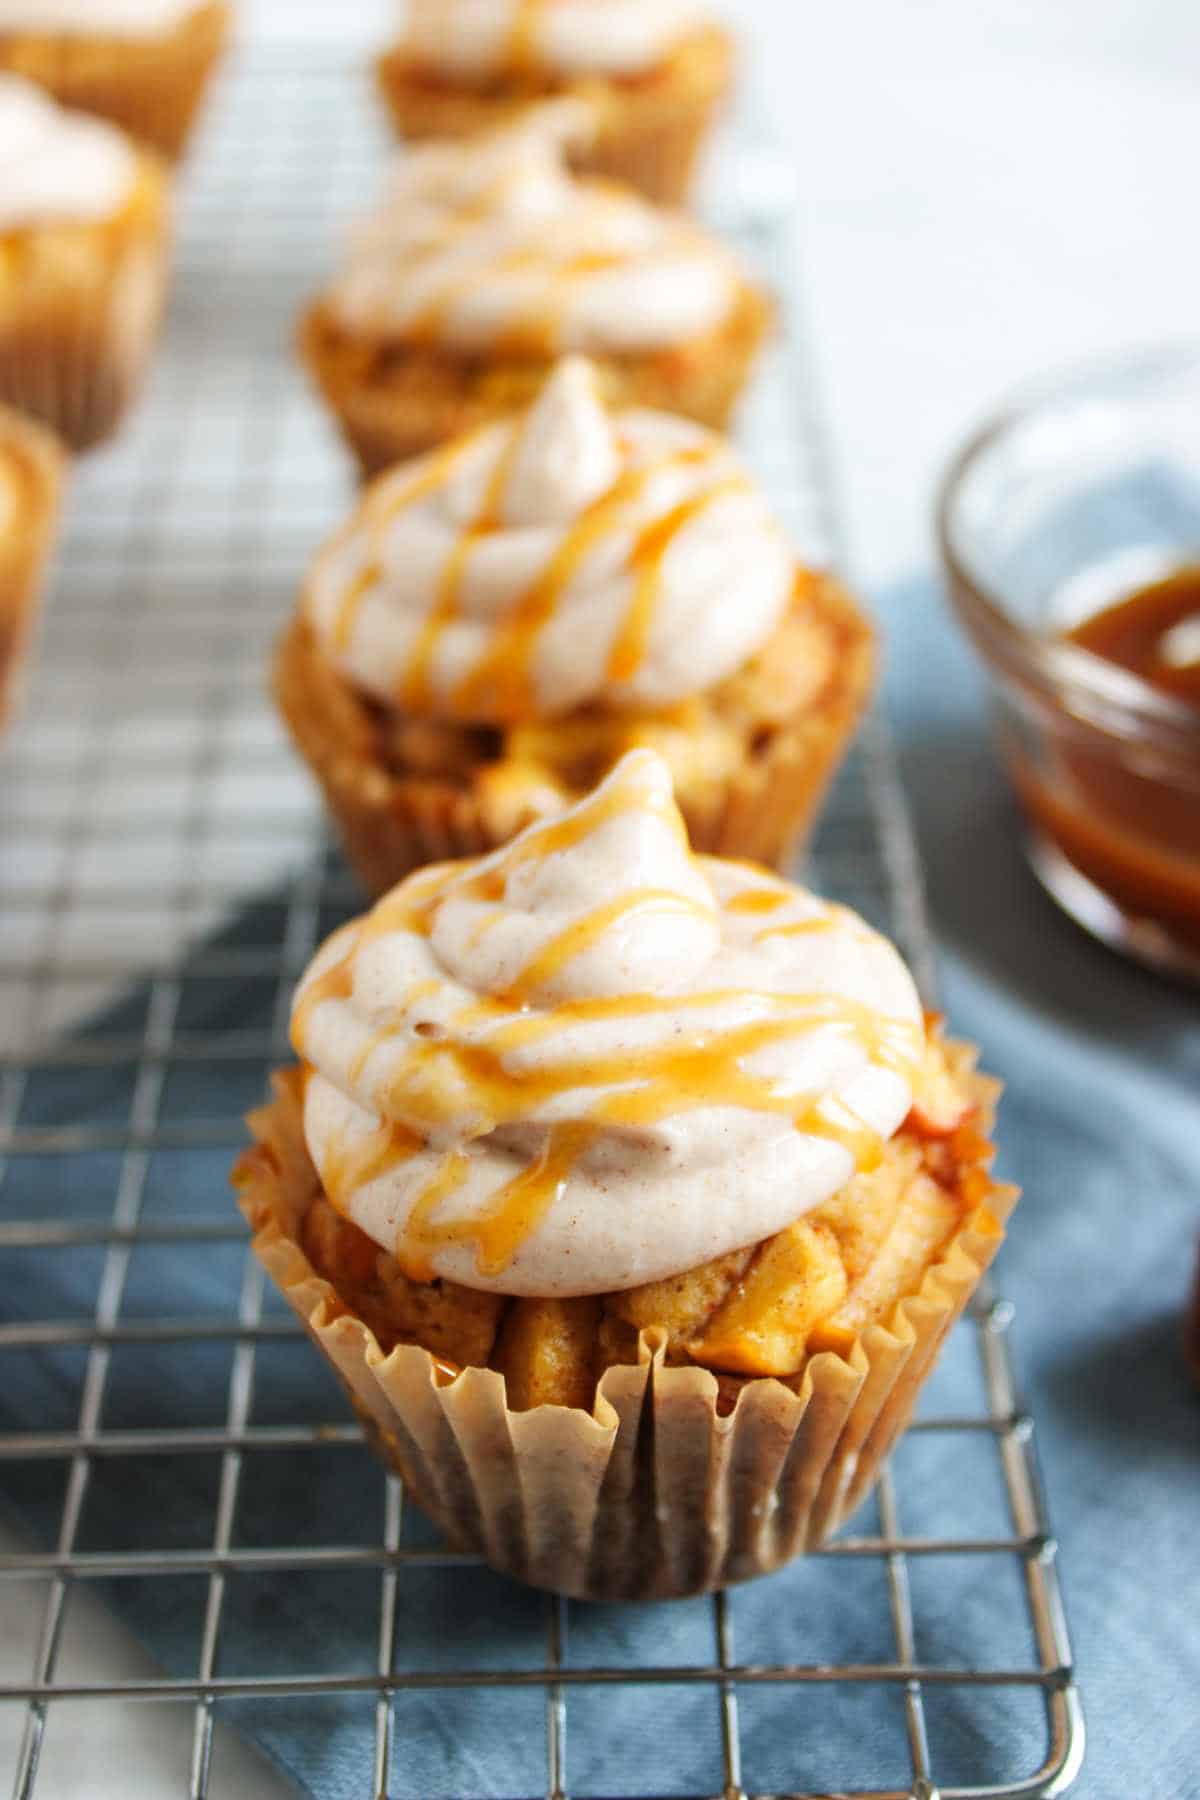 caramel drizzled cinnamon buttercream frosted spice cupcakes.